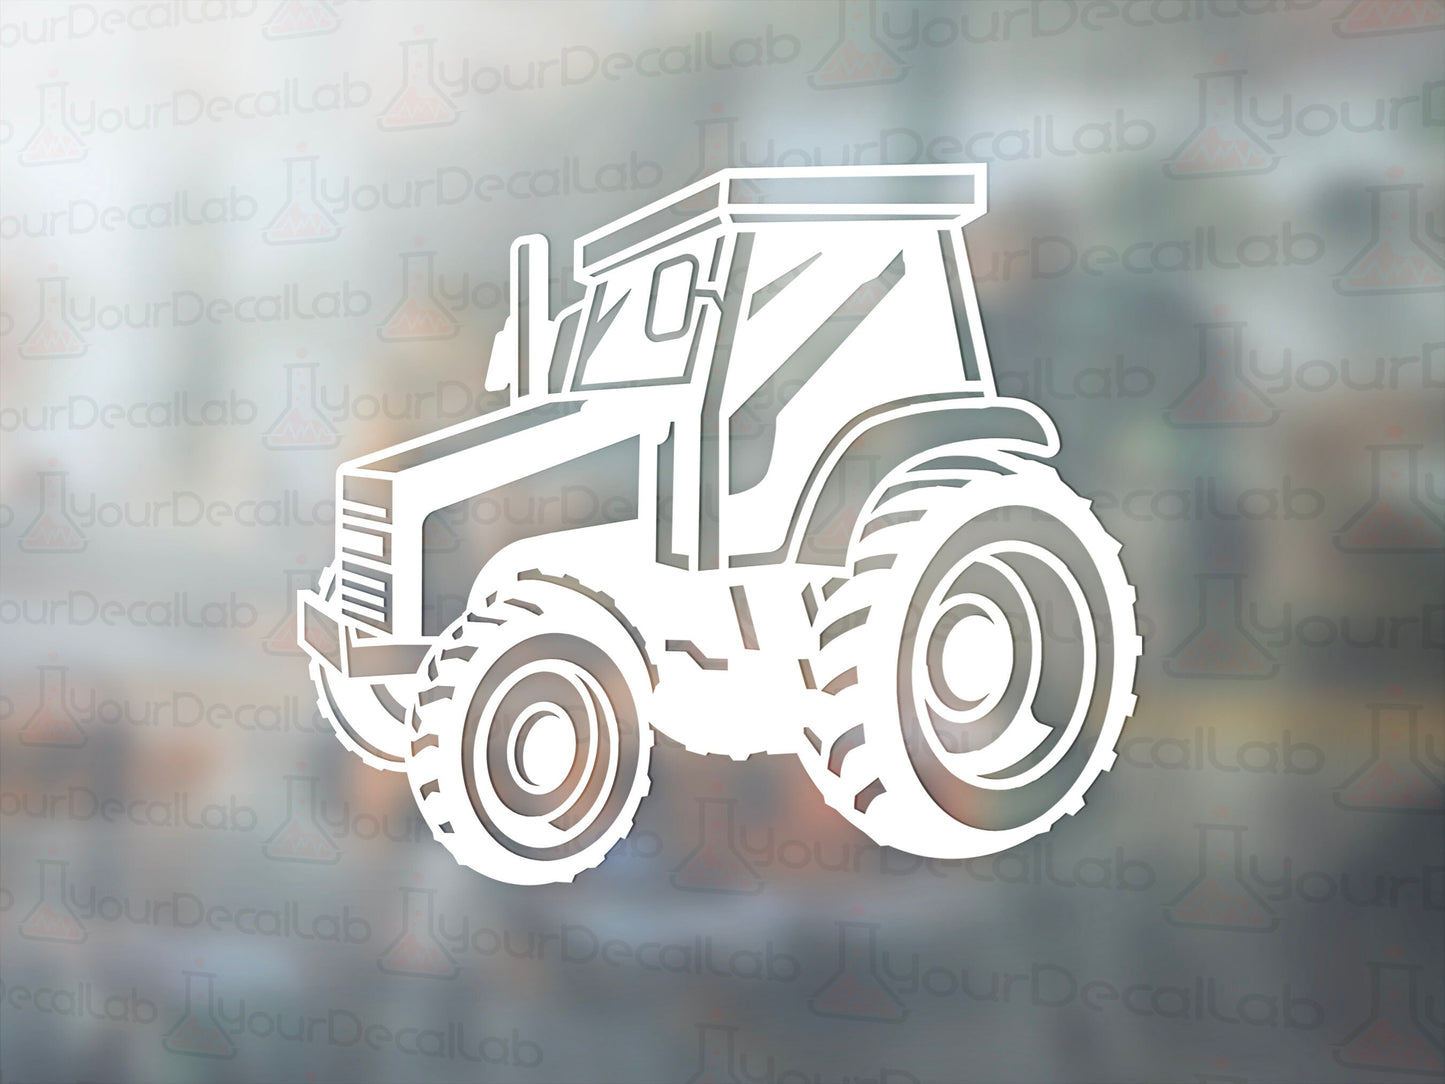 Cab Tractor Decal - Many Colors & Sizes